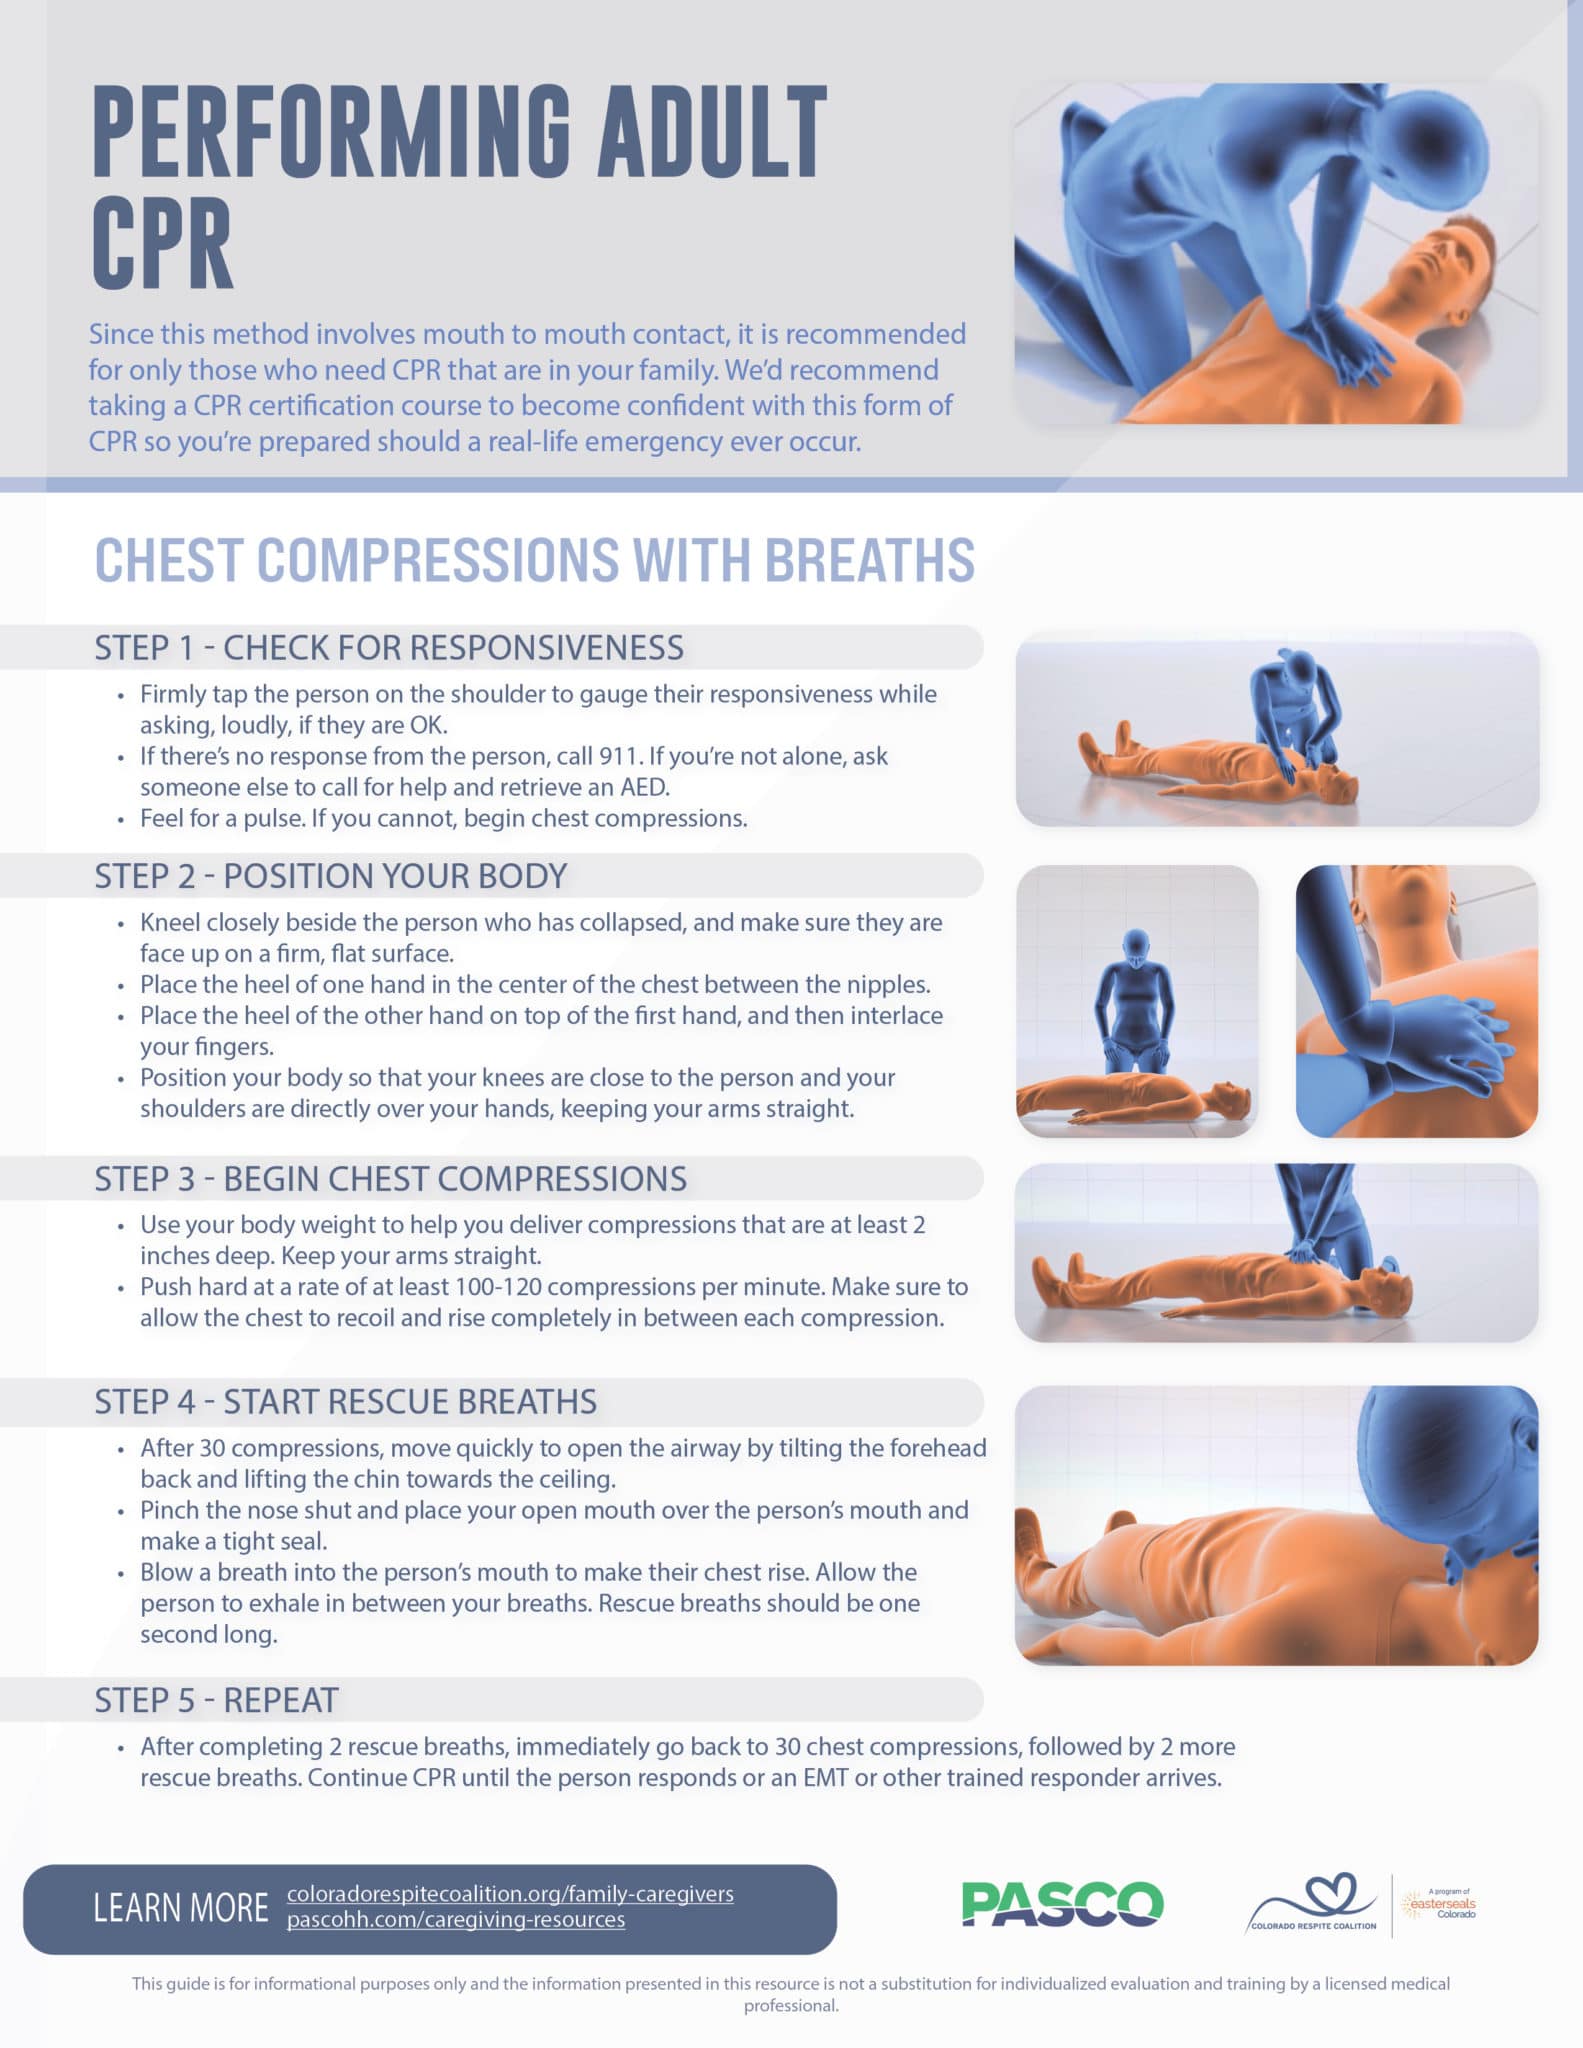 Adult CPR with Breaths